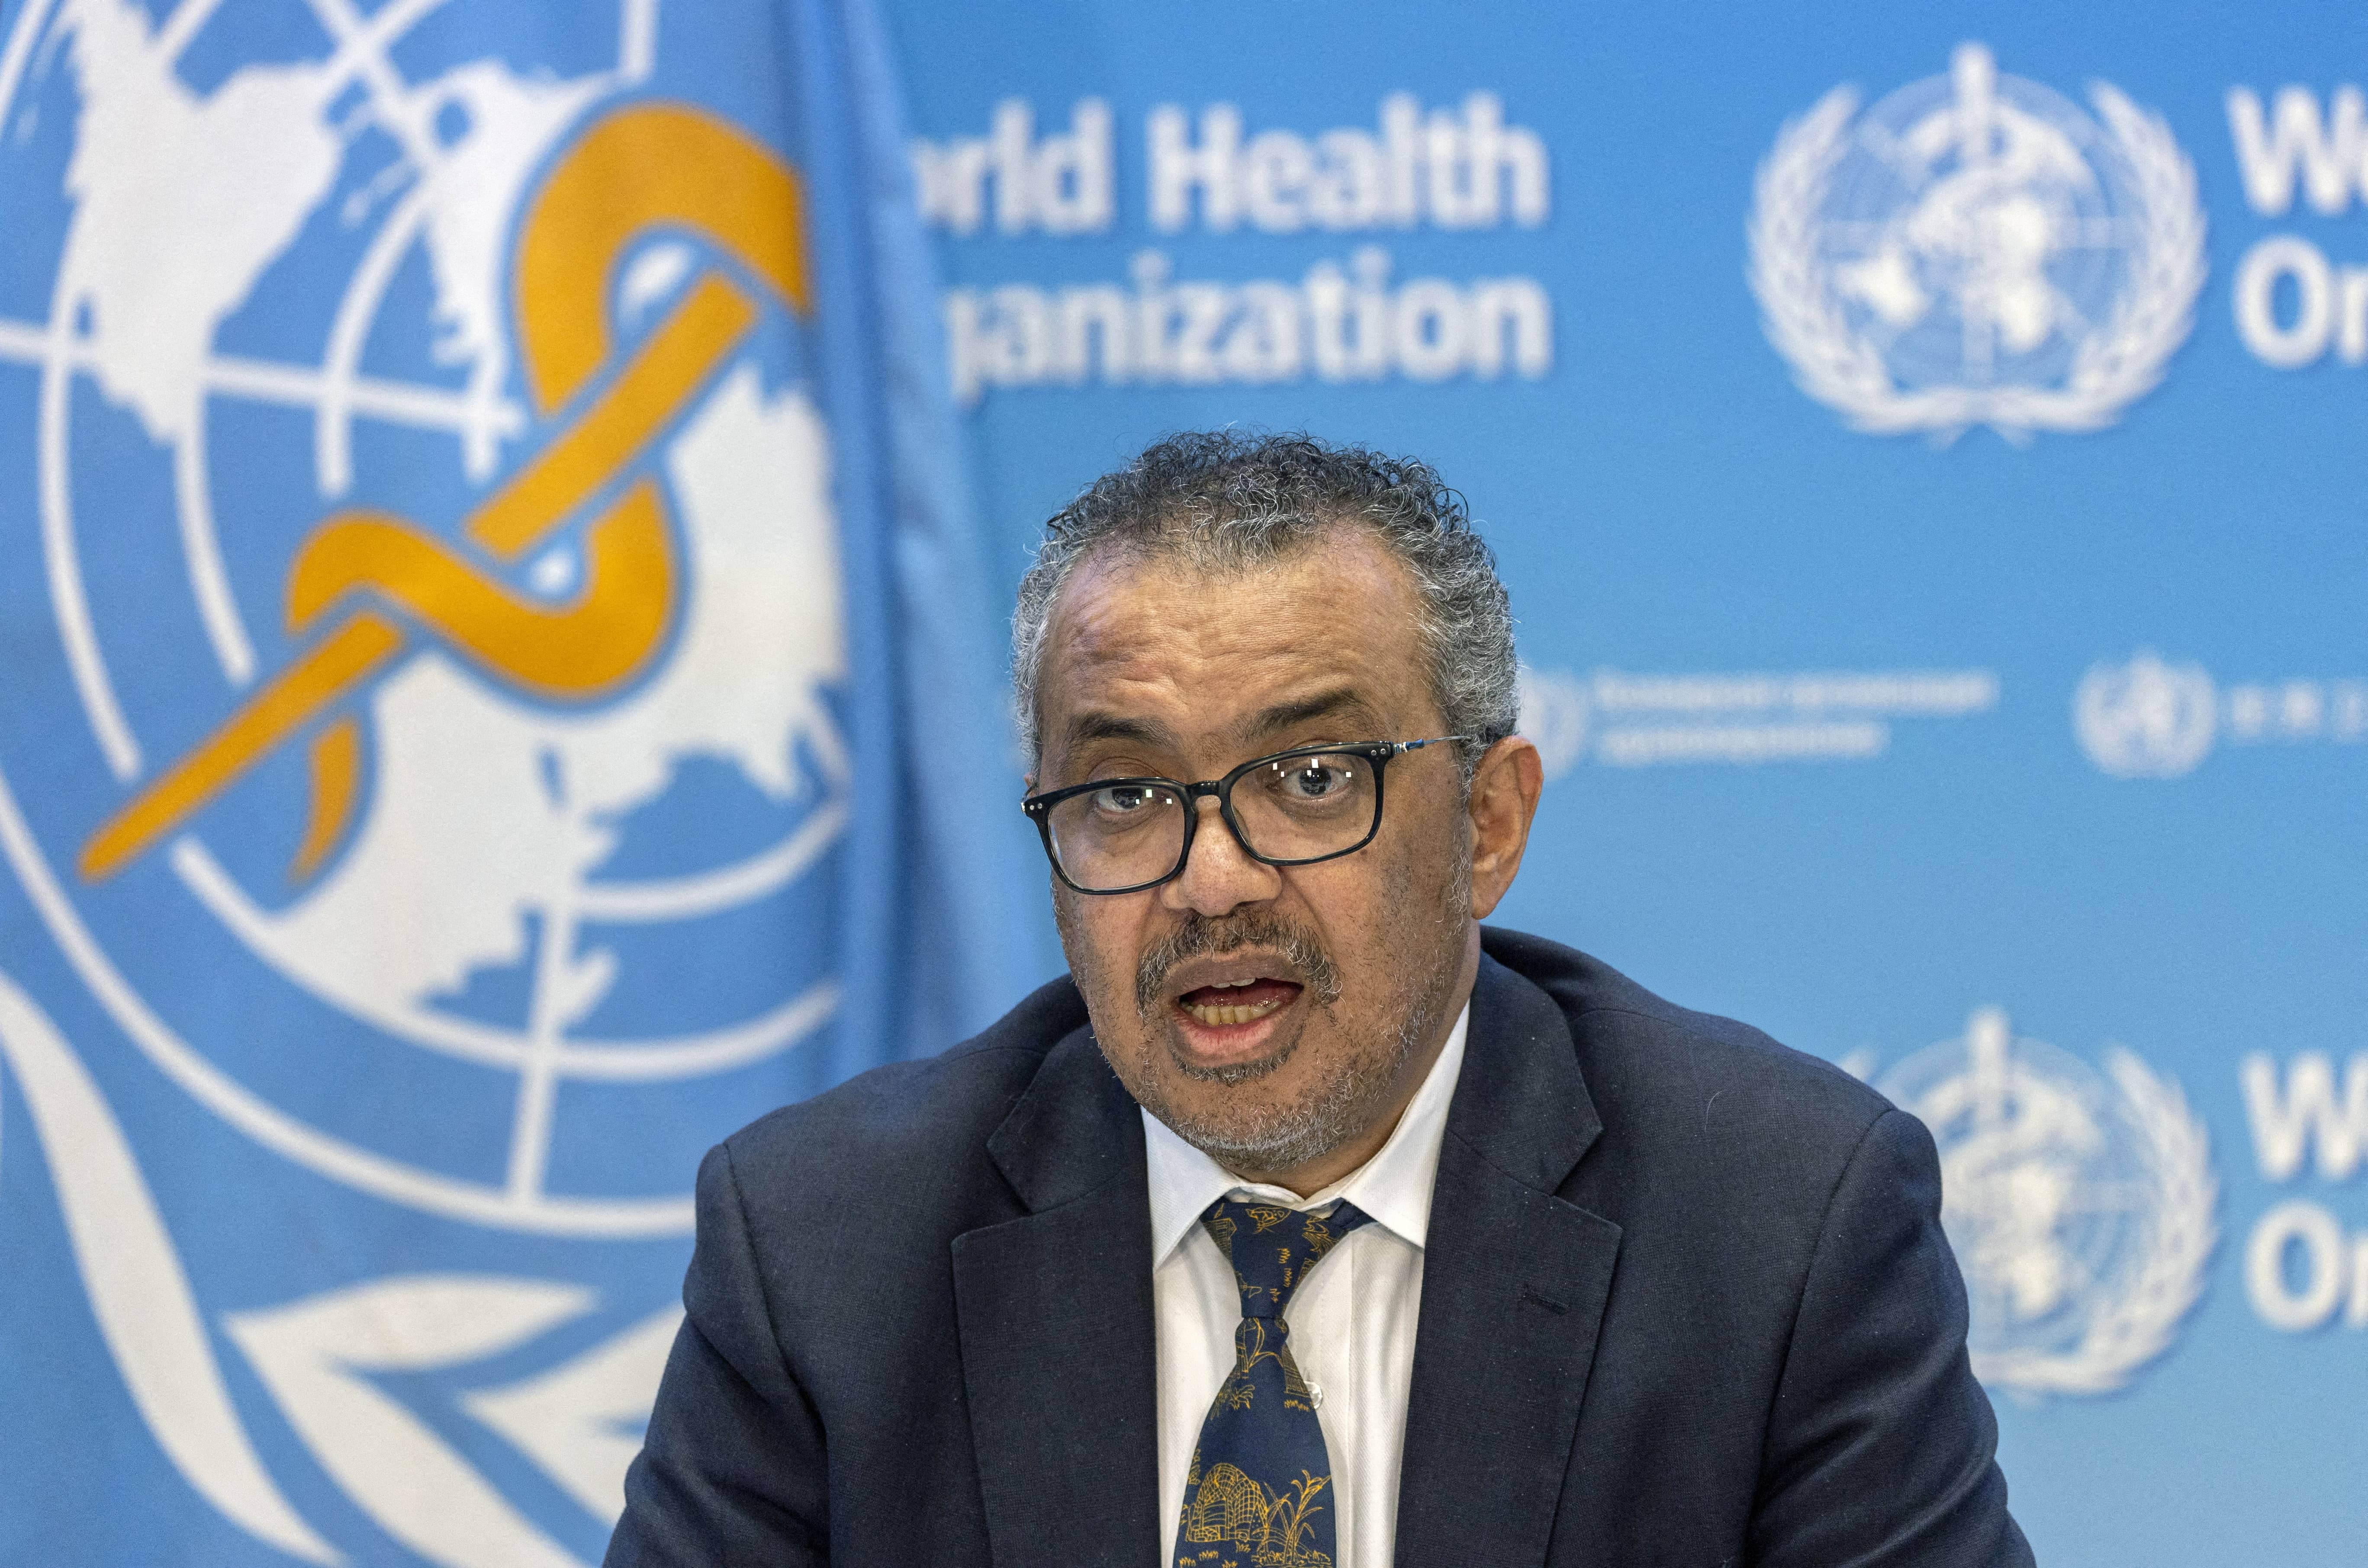 file-photo-director-general-of-the-who-dr-tedros-adhanom-ghebreyesus-attends-an-acanu-briefing-in-geneva